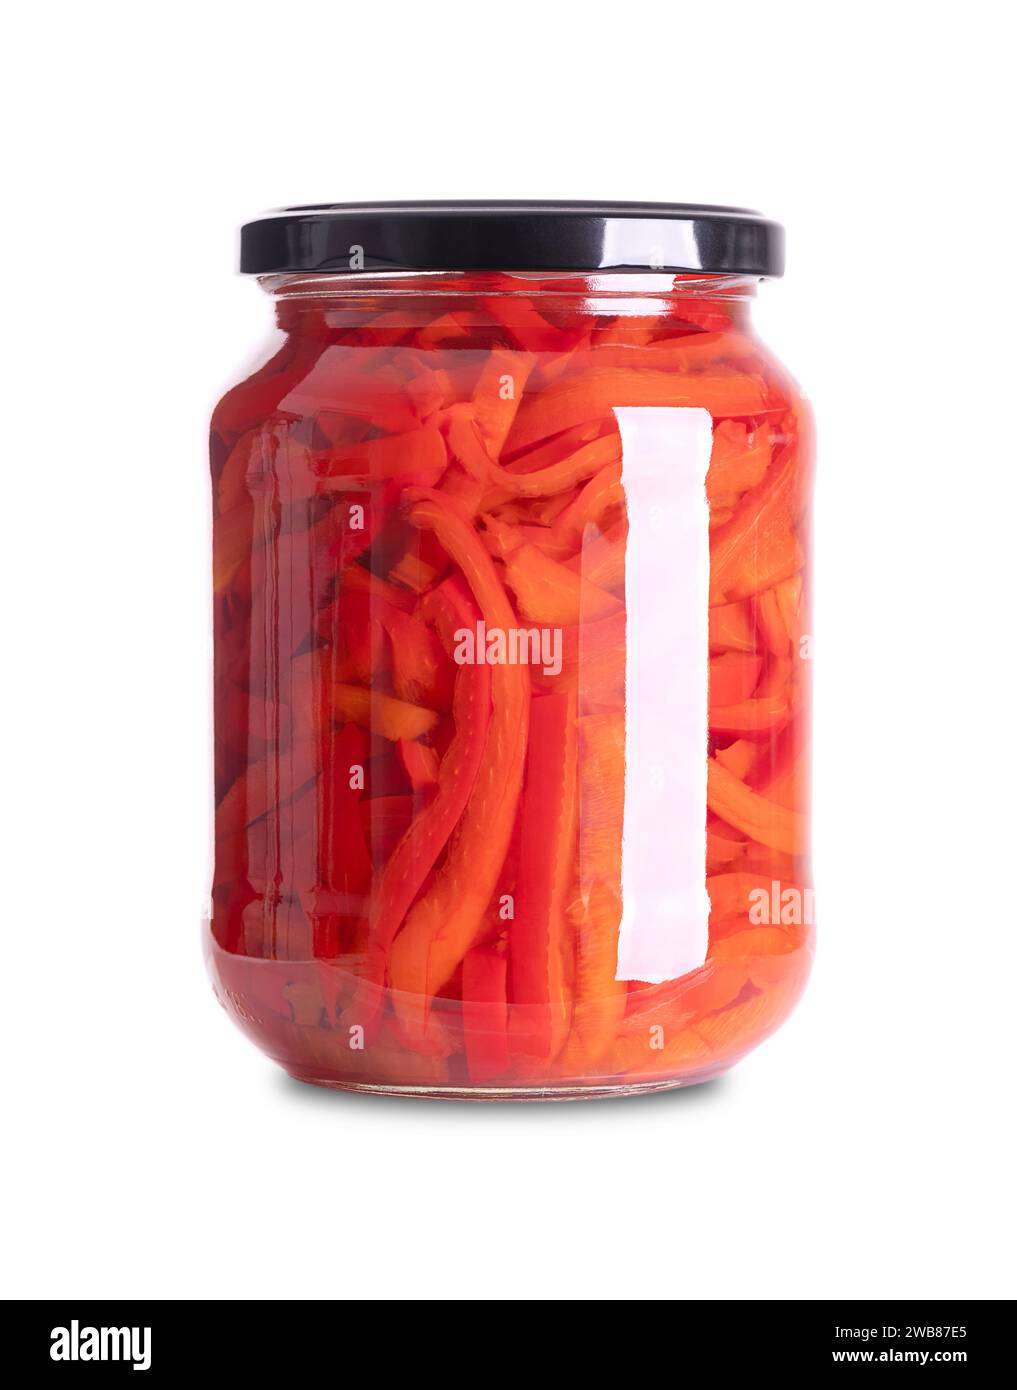 Red bell peppers, pickled in a glass jar. Sweet pepper slices, pasteurized and preserved in a brine of vinegar and salt. Used as salad or side dish. Stock Photo